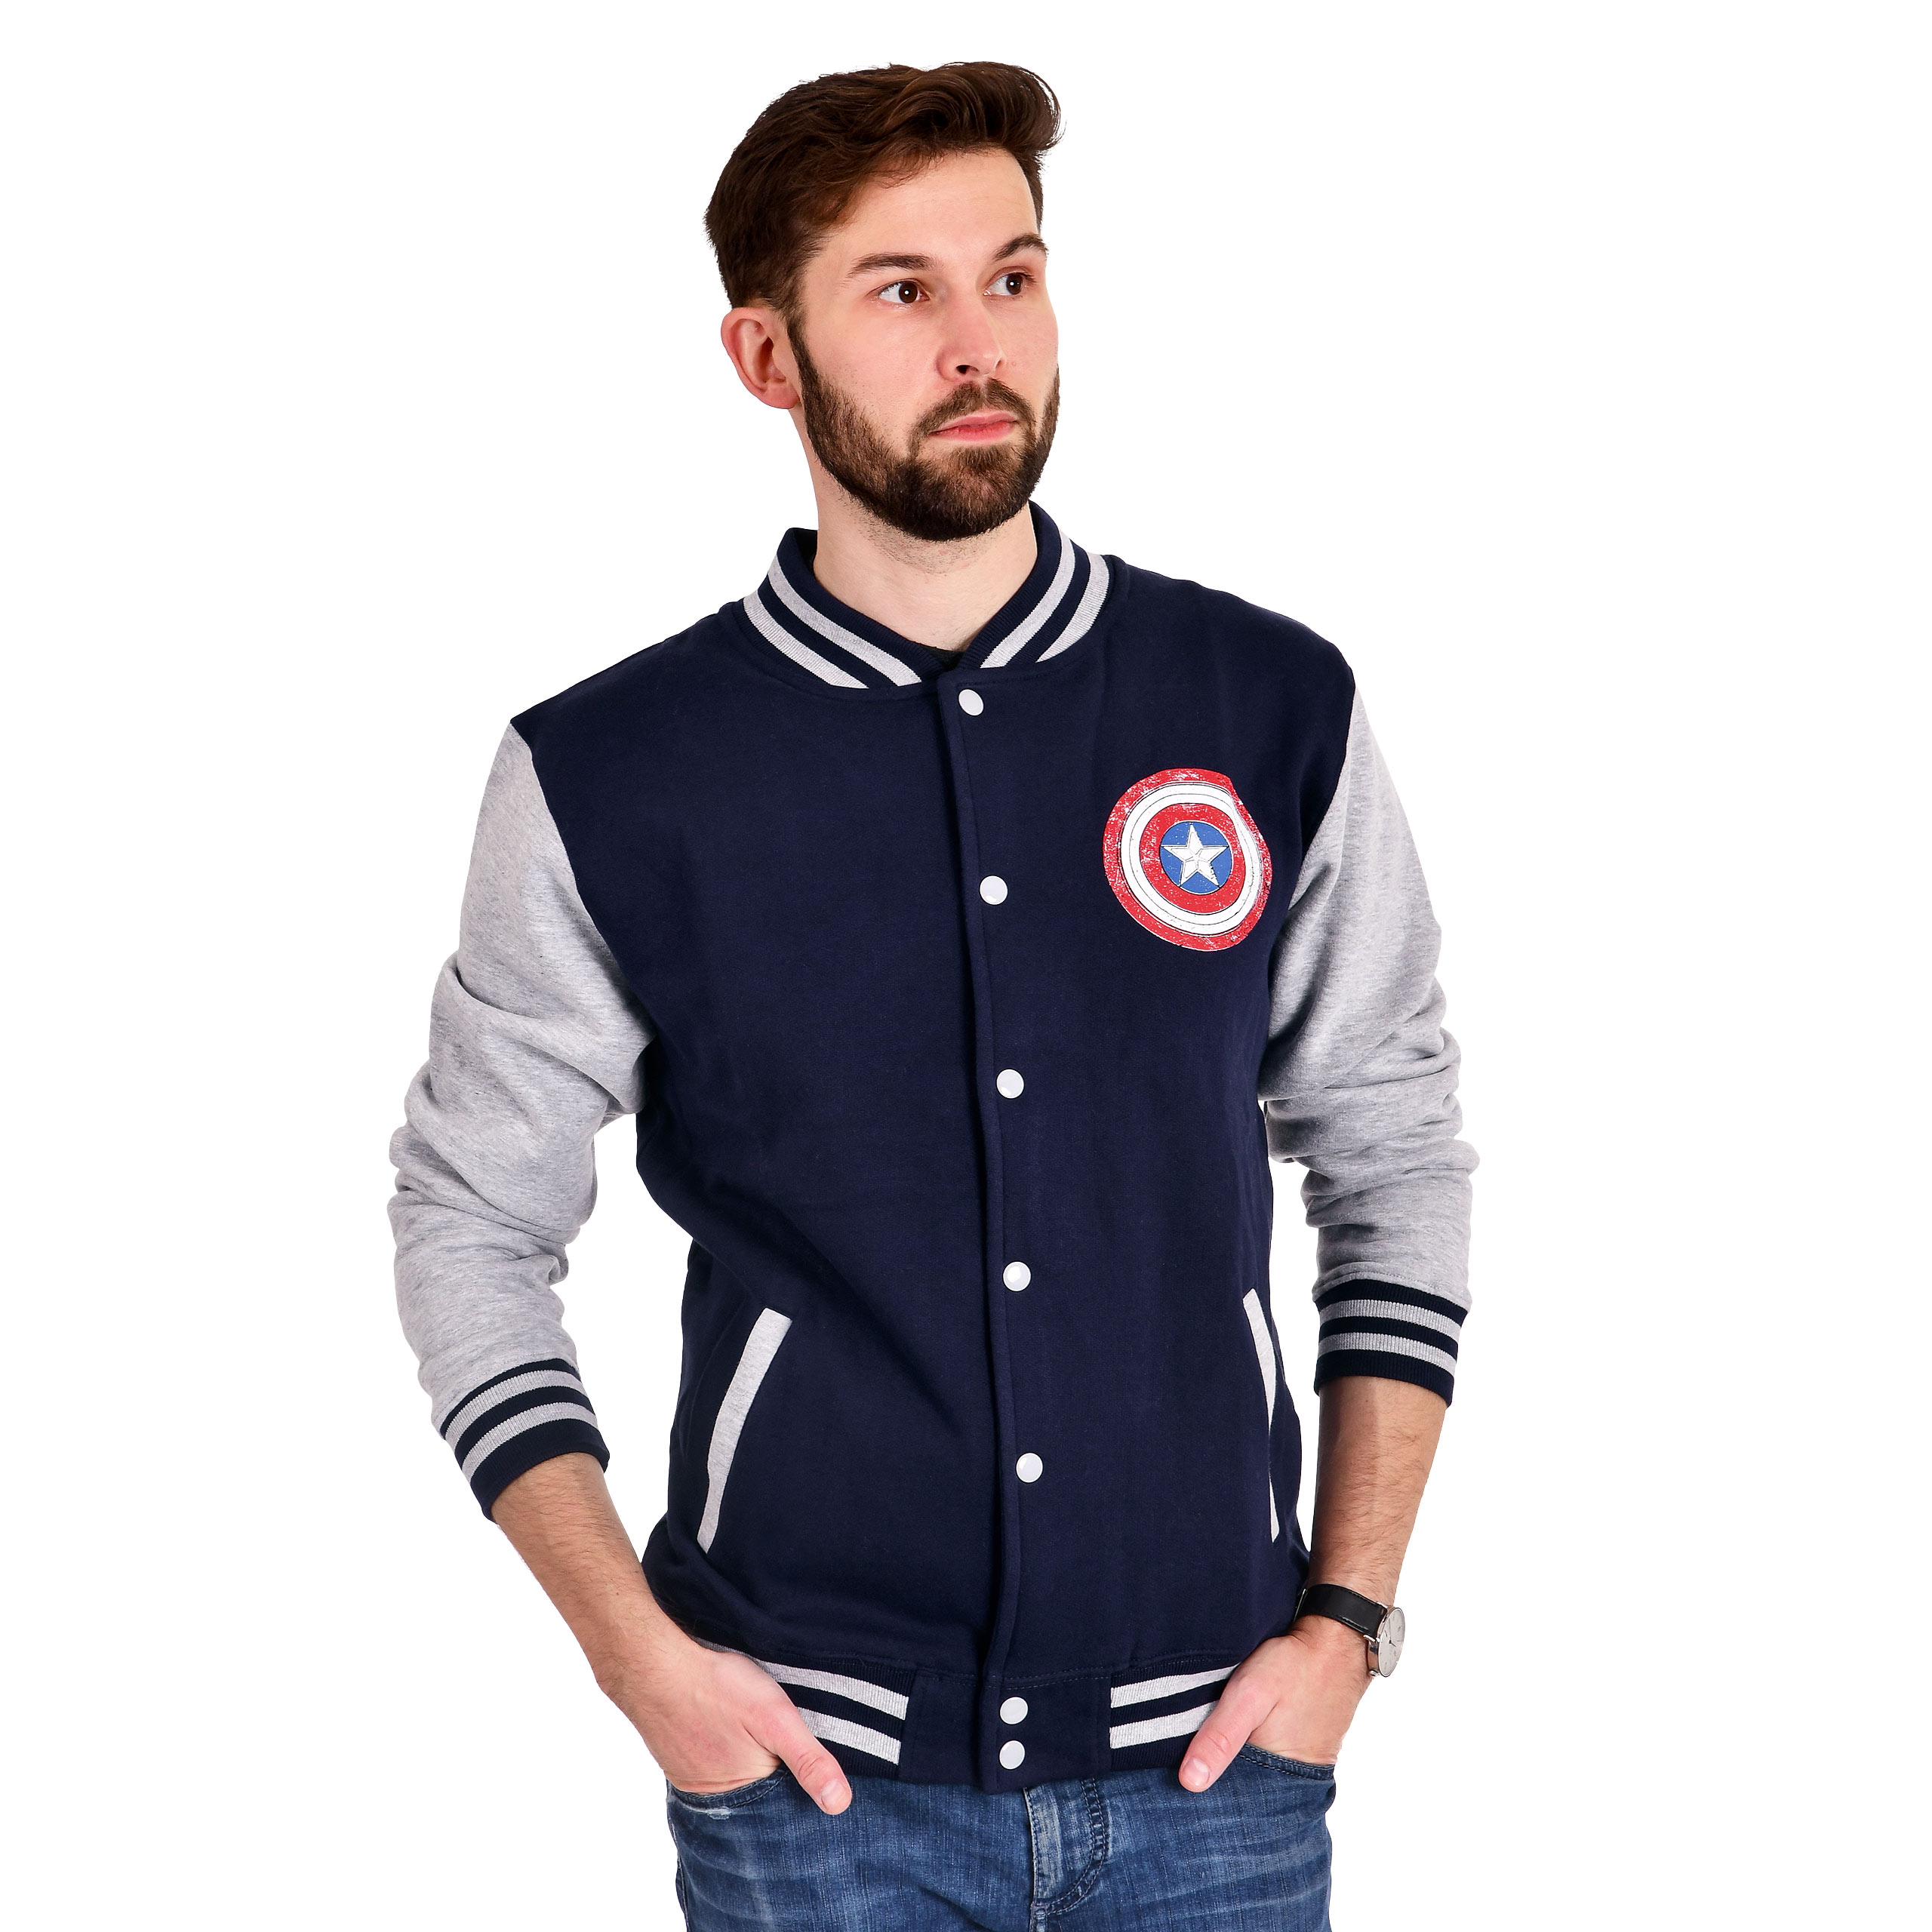 Marvel - Who Will Wield The Shield College Jacket